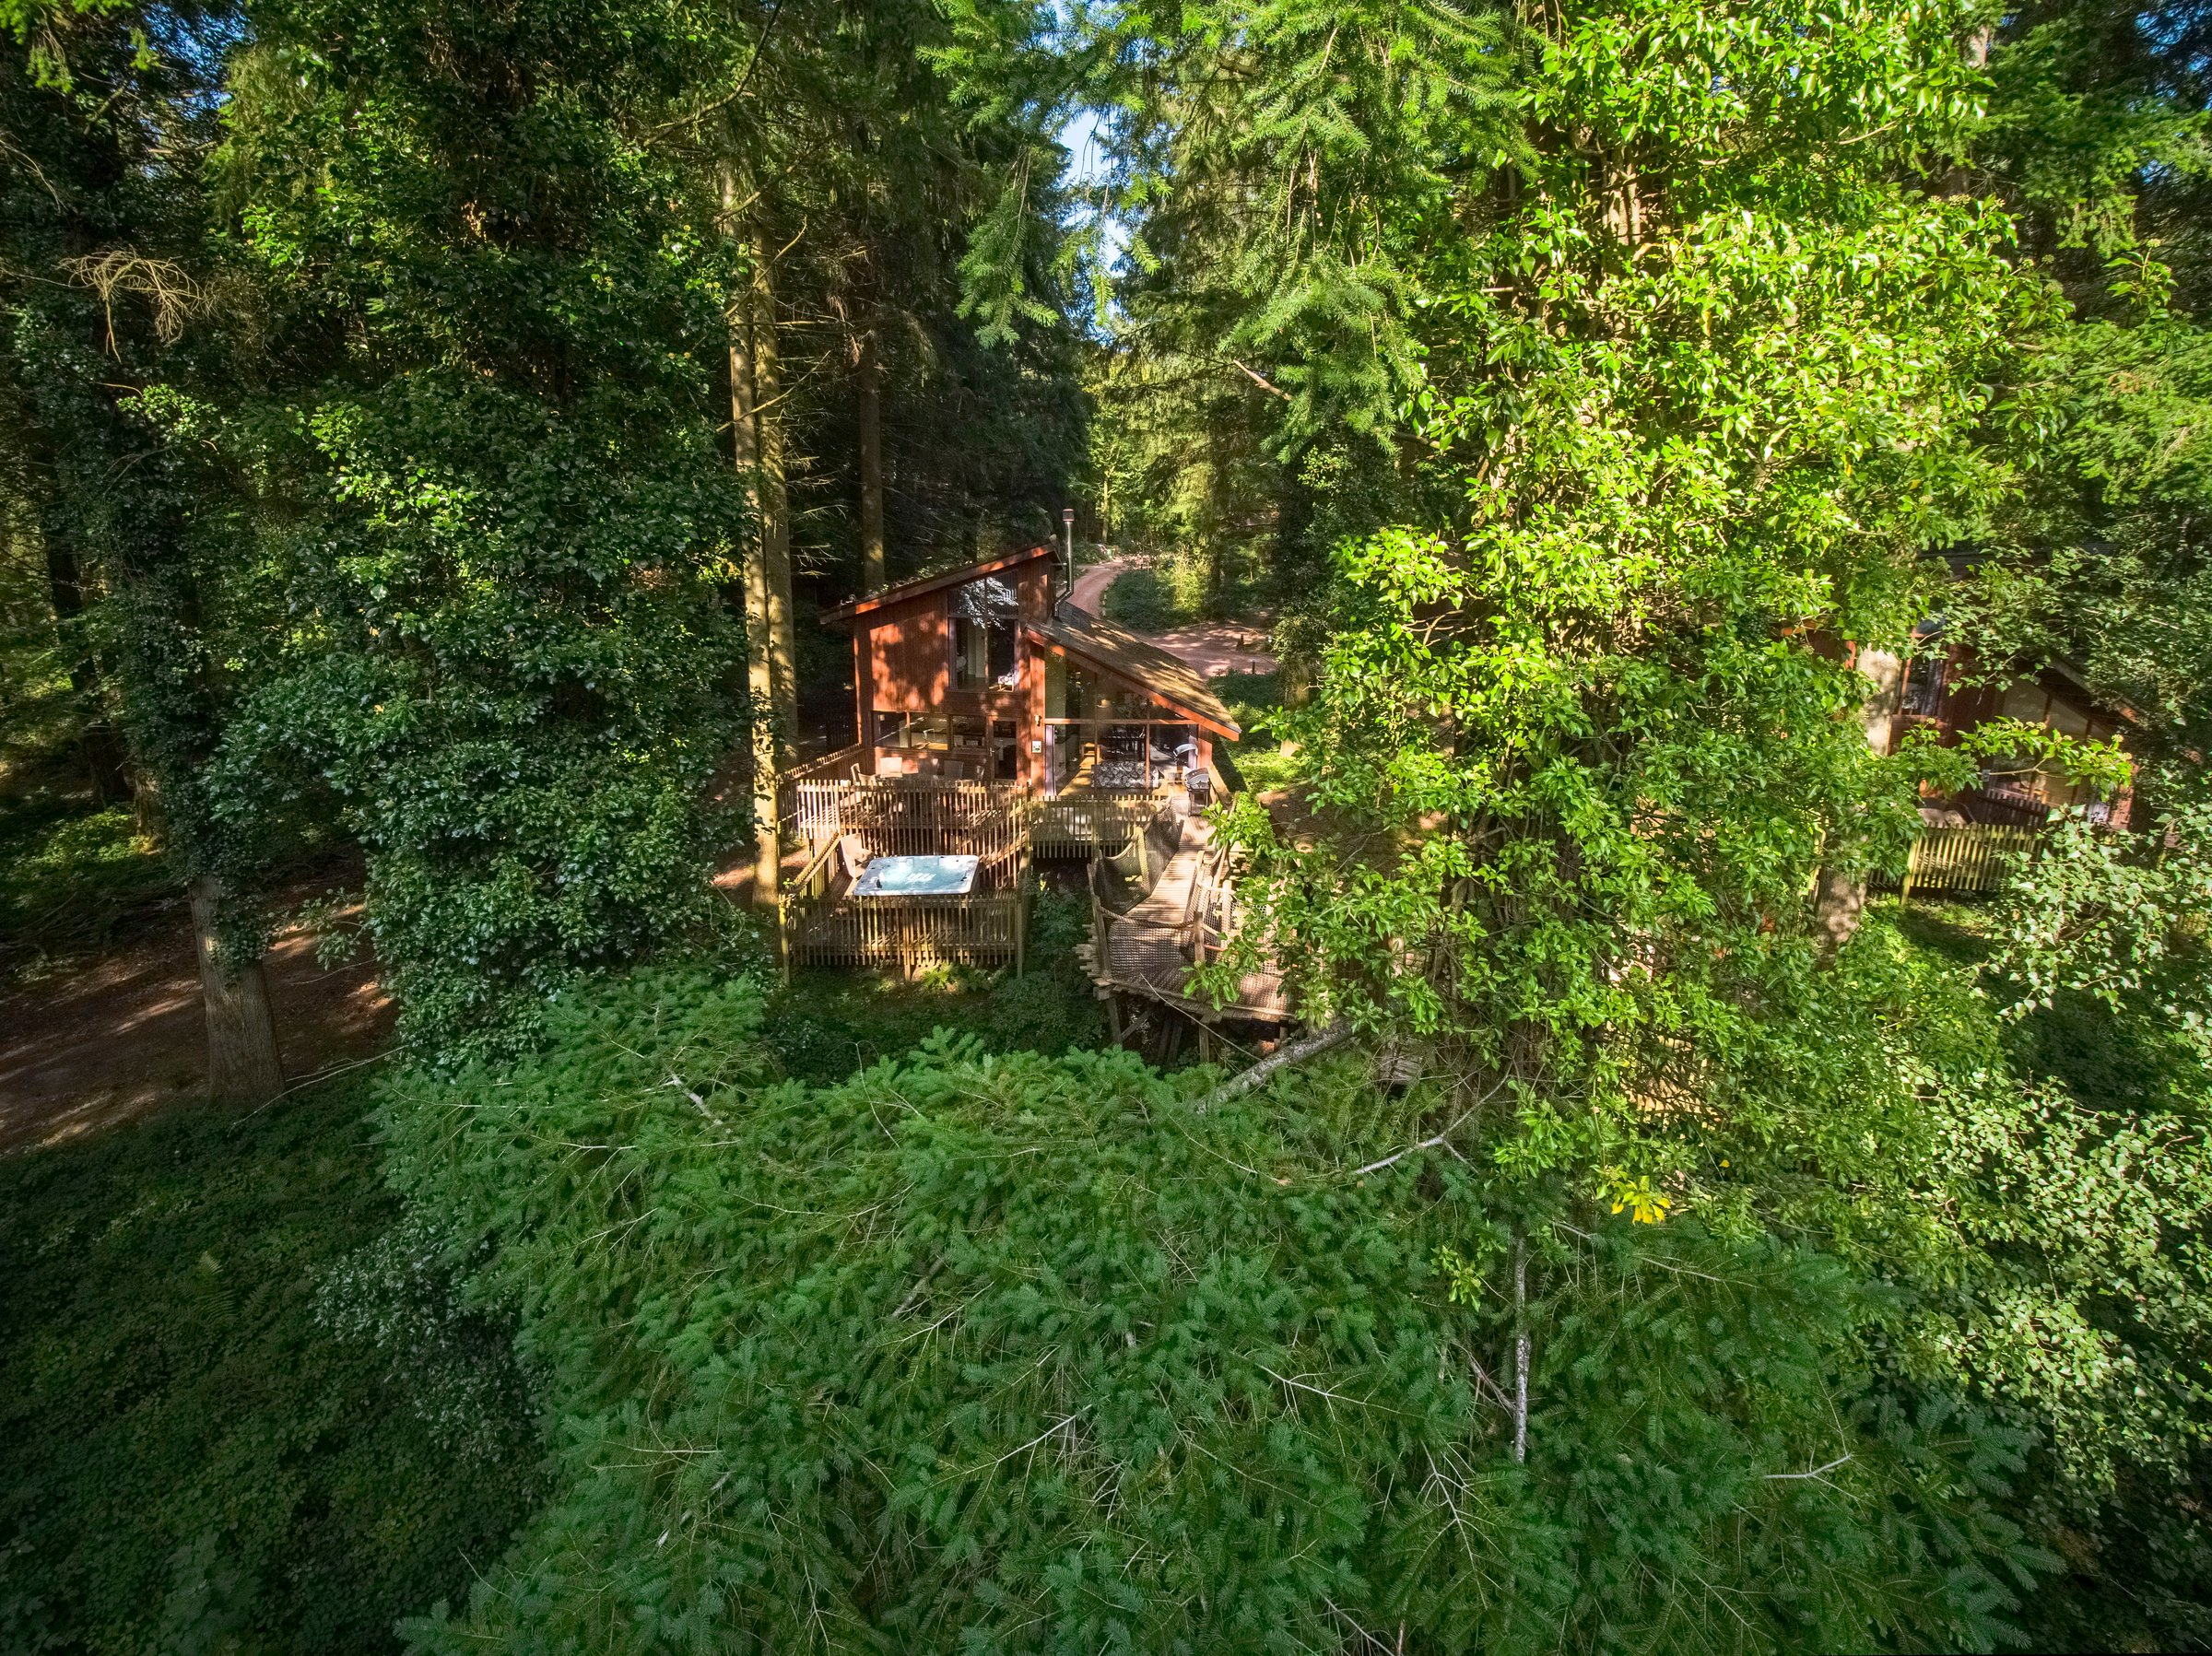 Golden Oak Treehouse at Forest of Dean, Gloucestershire